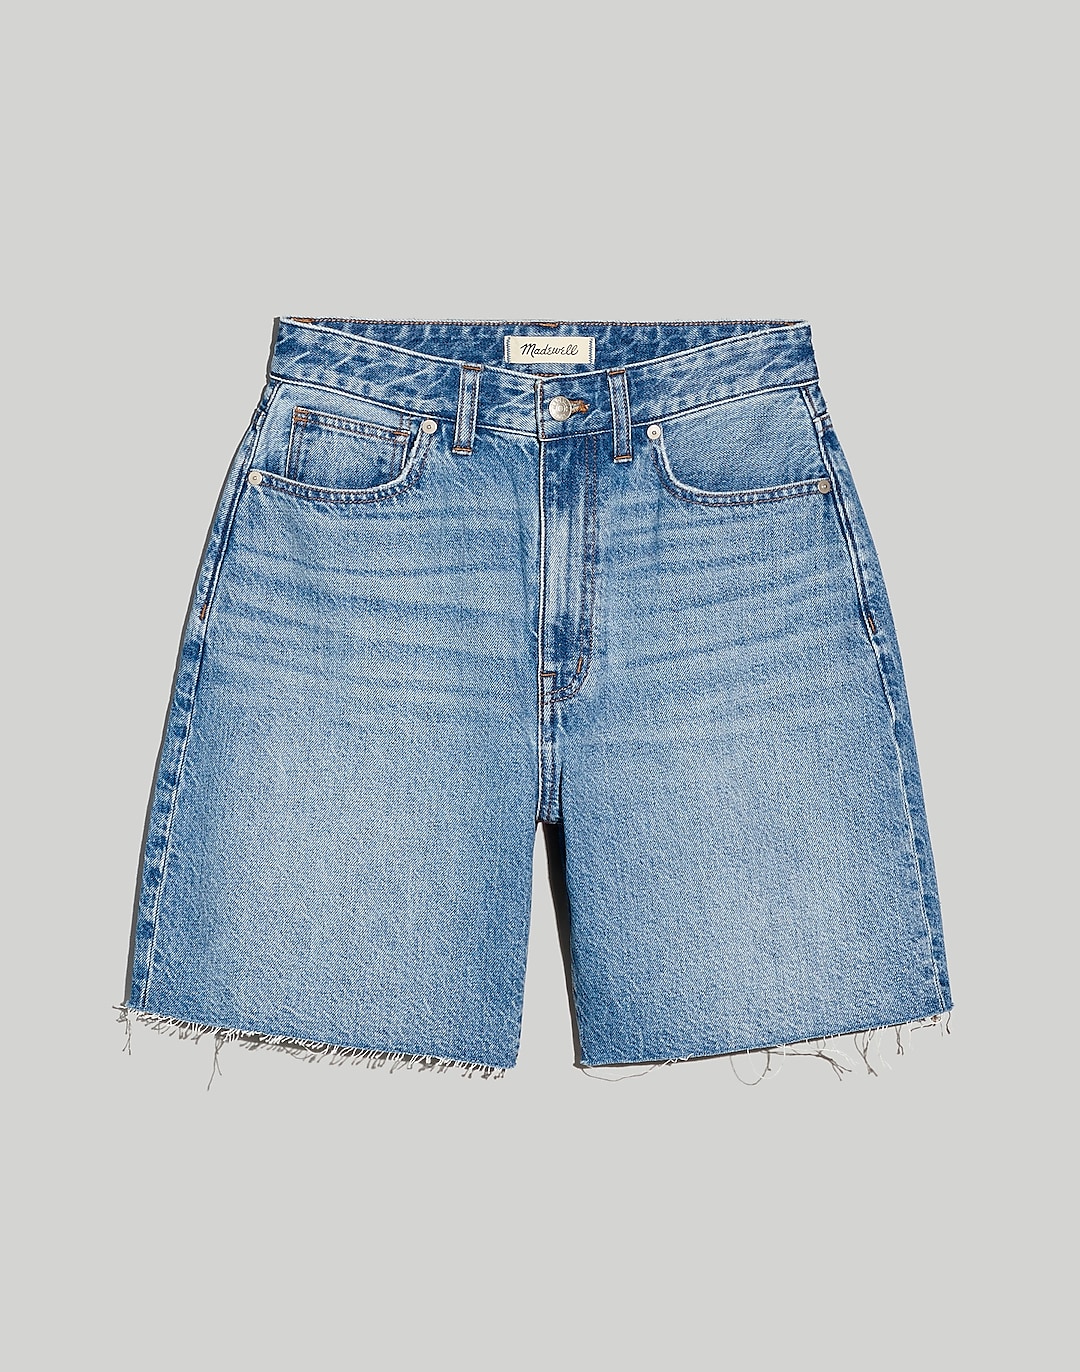 Curvy Baggy Jean Shorts in Crestford Wash | Madewell